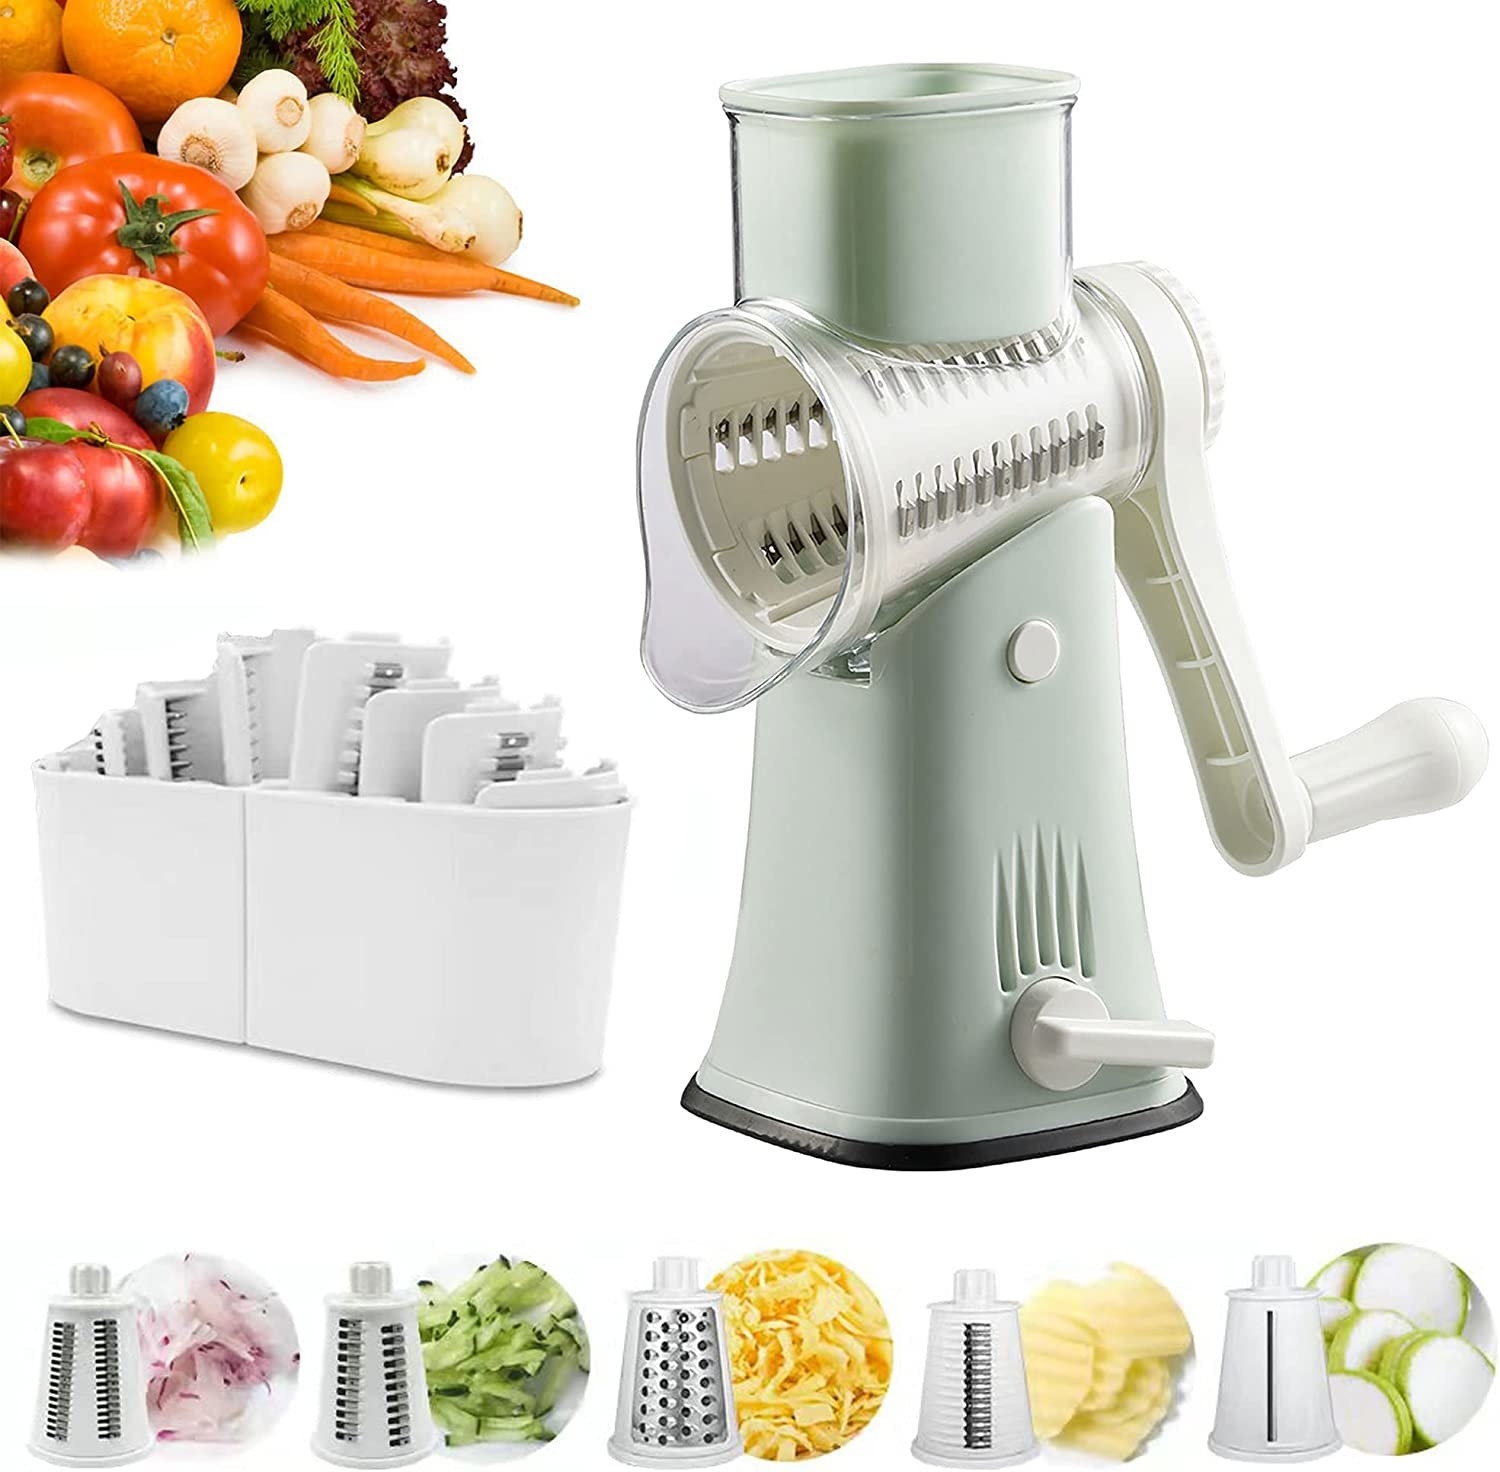 light green five-in-one rotary cheese grader with different steel blades for also slicing fruit and veggies